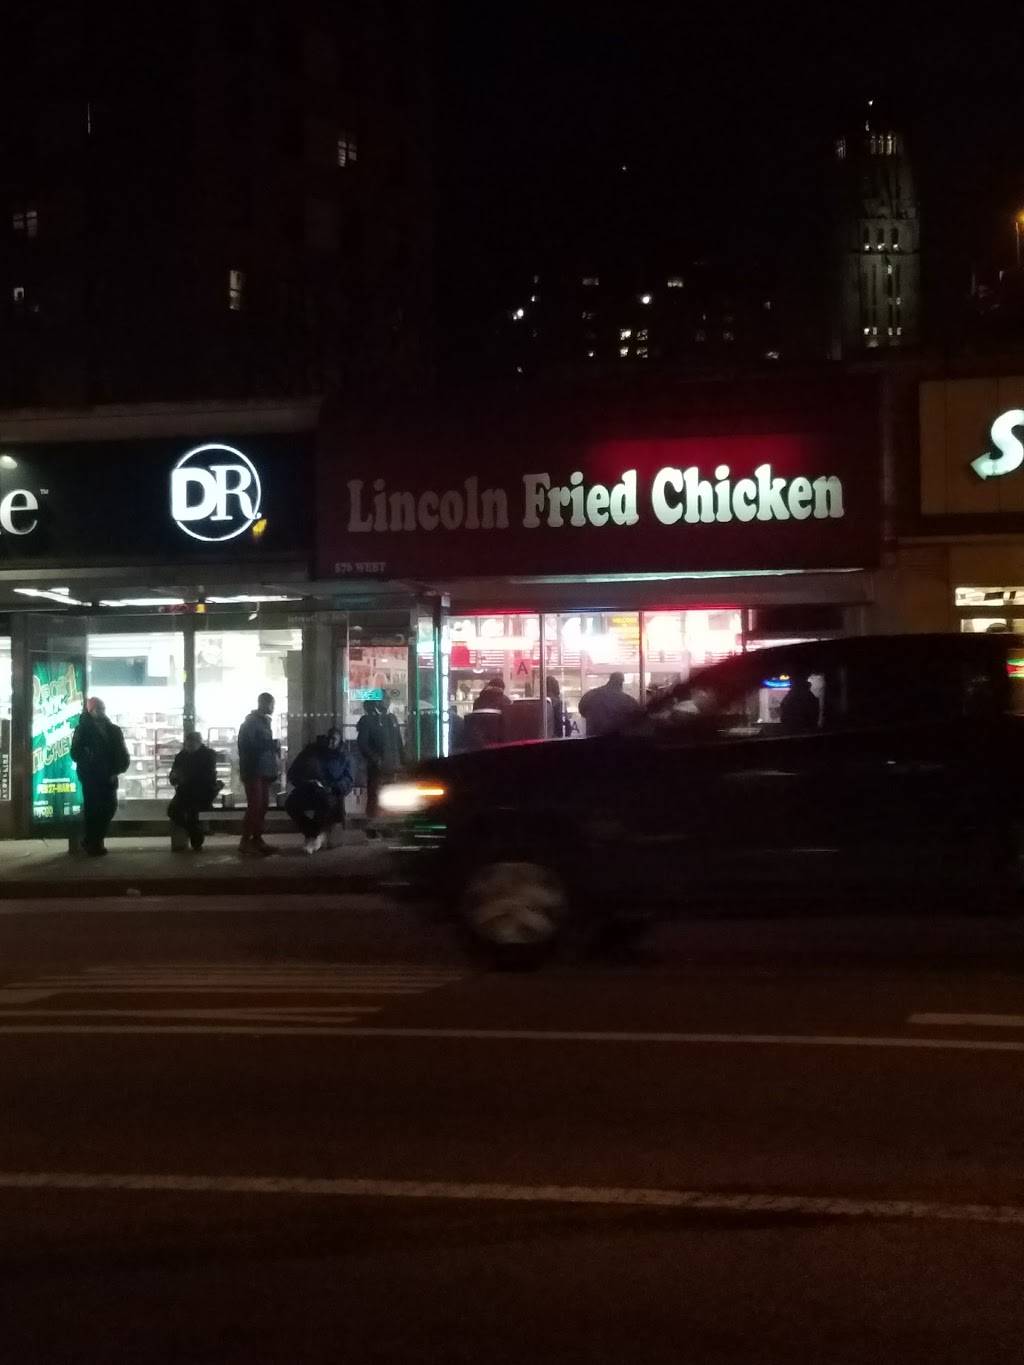 Lincoln Fried Chicken | meal takeaway | 576 W 125th St, New York, NY 10027, USA | 2126625489 OR +1 212-662-5489